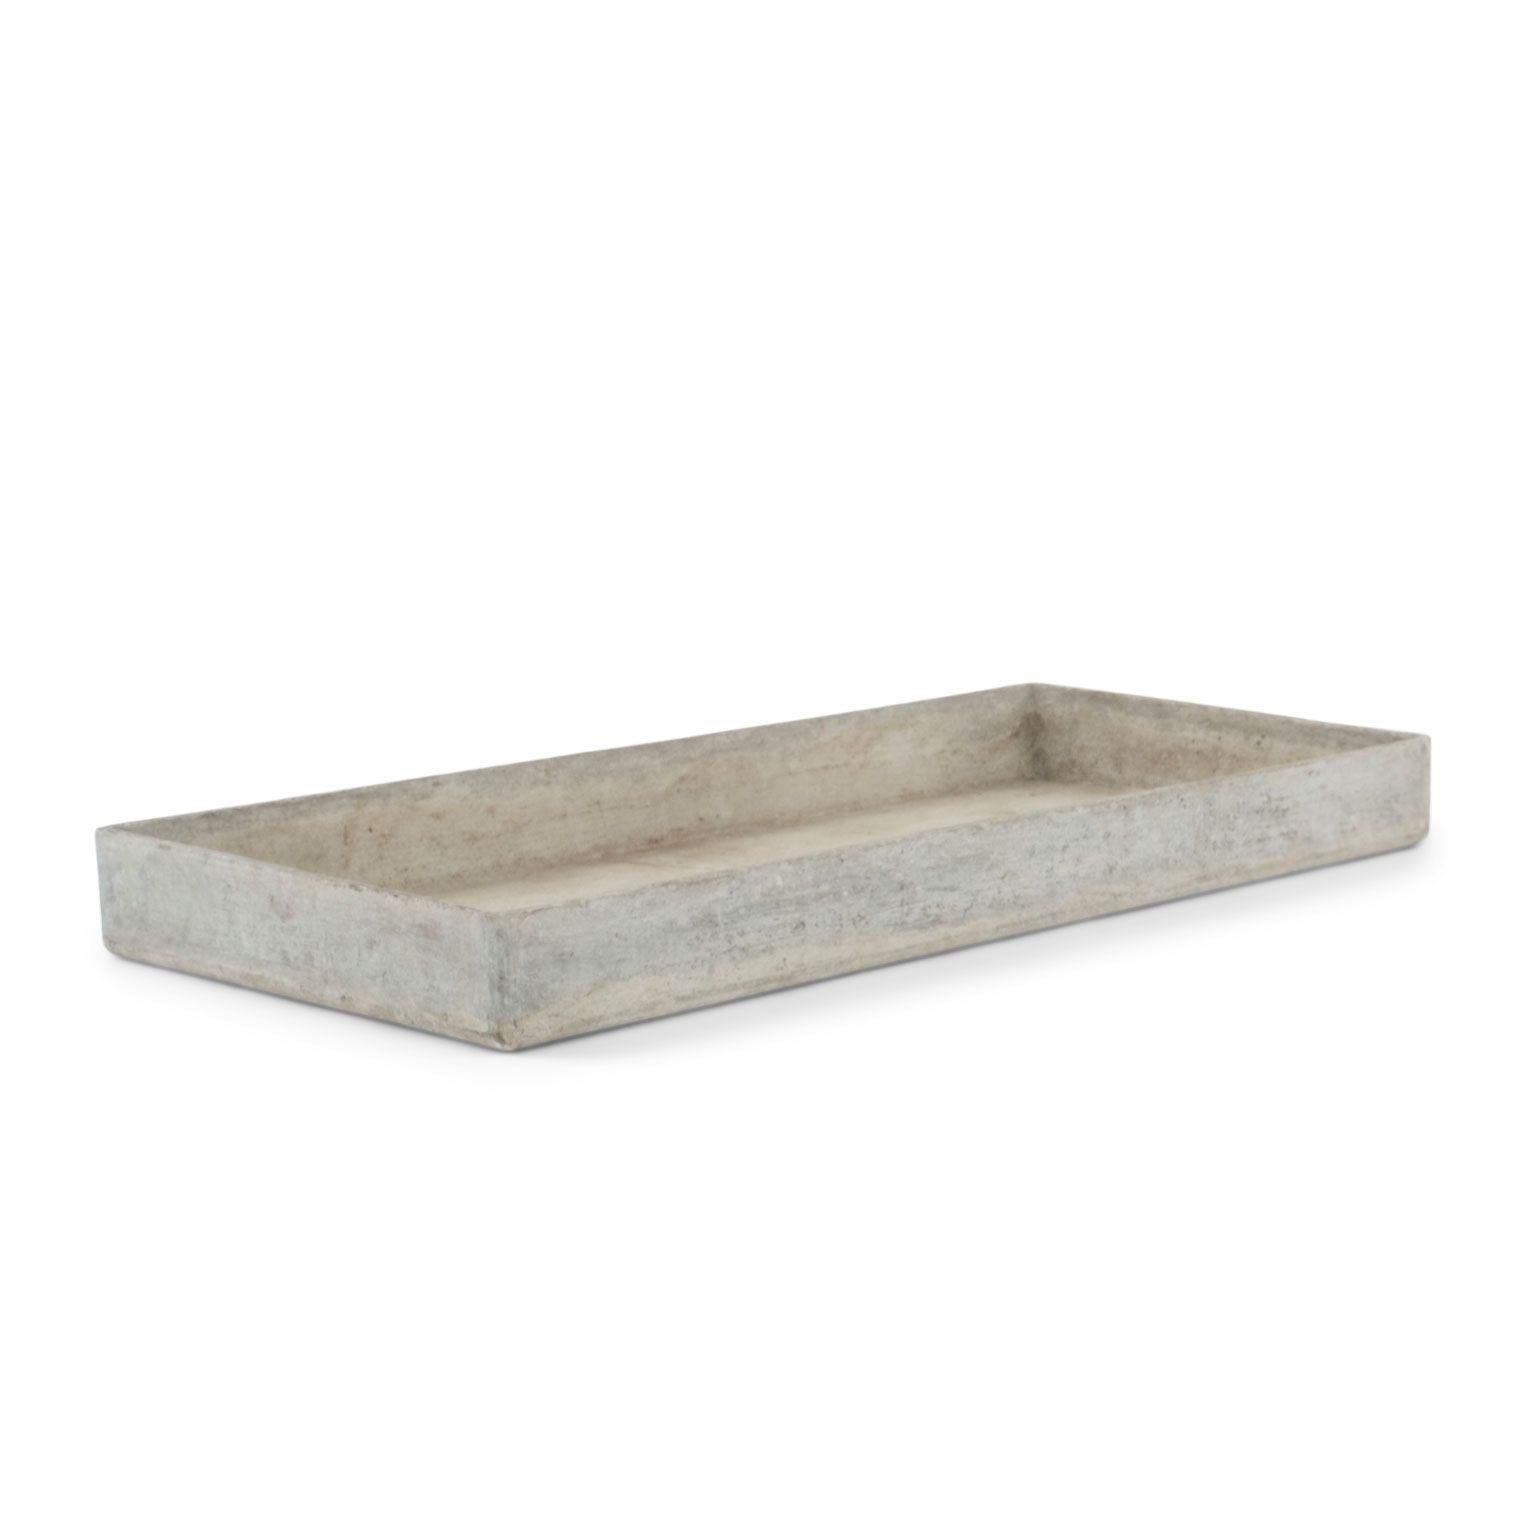 Vintage rectangular cement tray circa 1960-1979. Two trays available. Sold individually and priced $1,600 each.